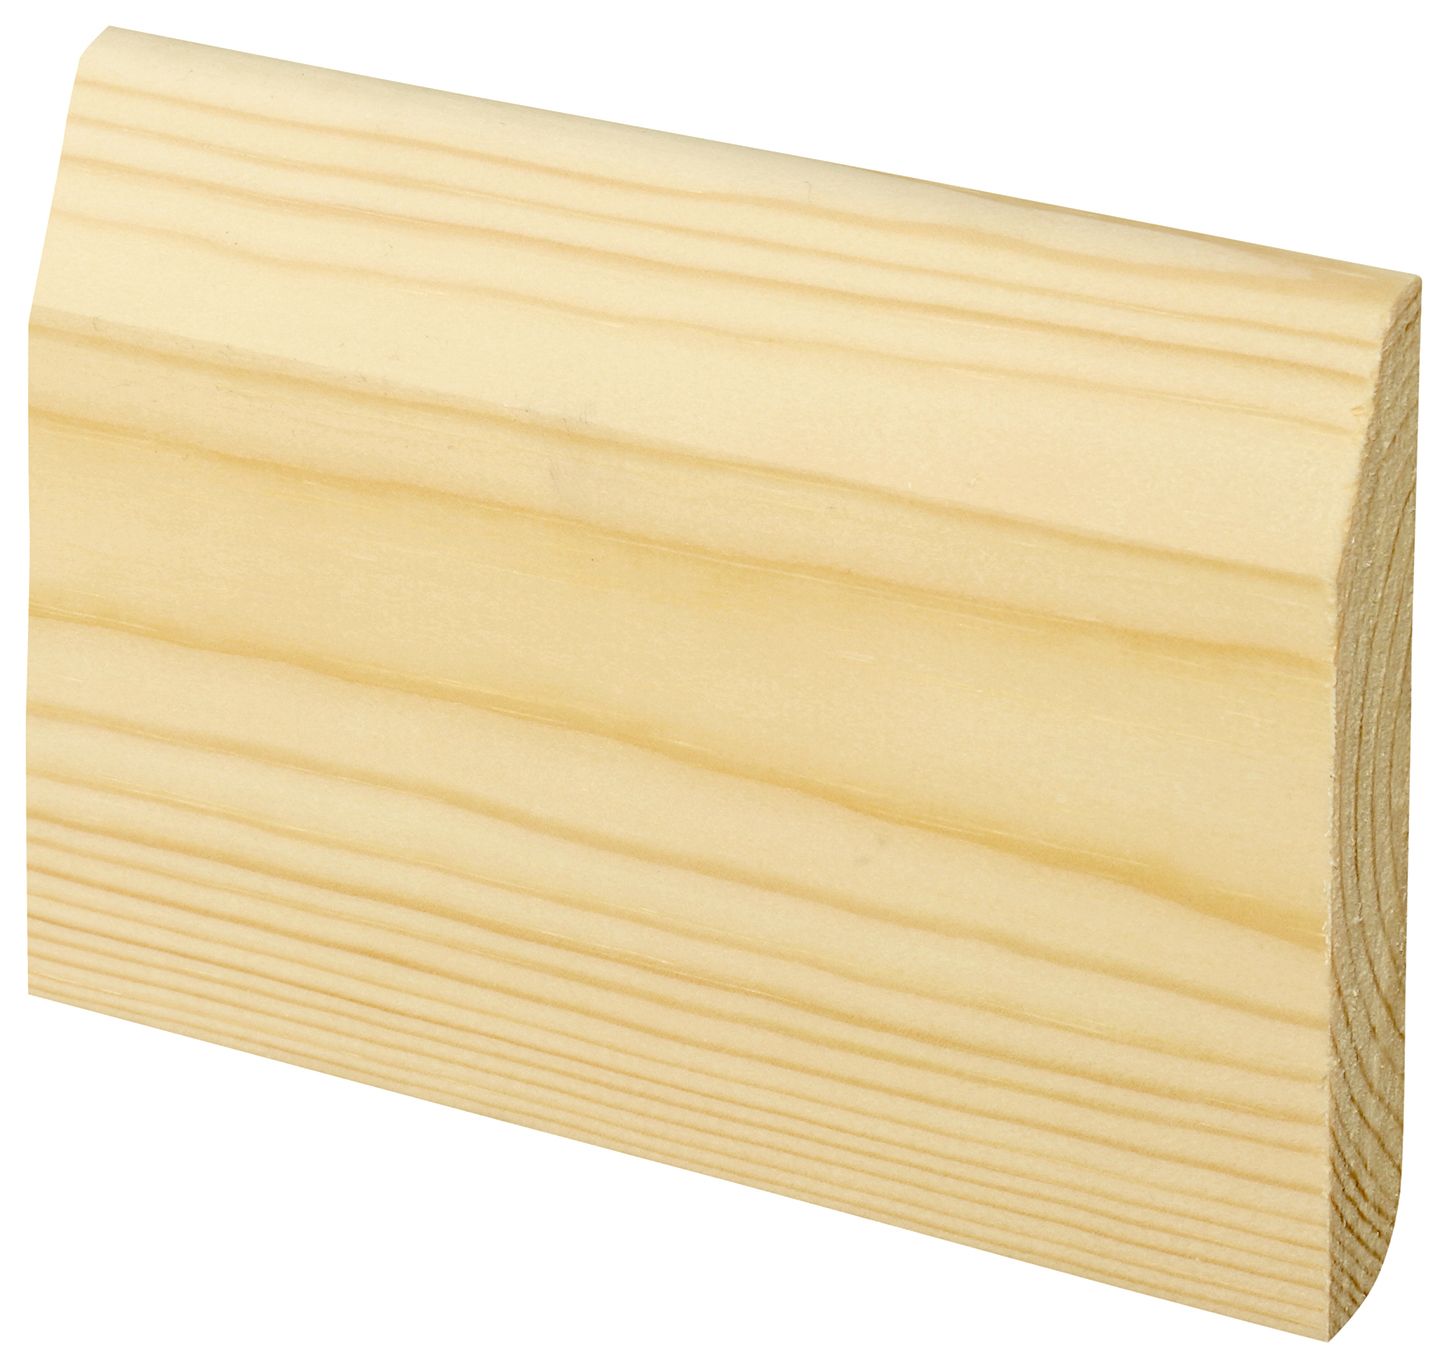 Image of Wickes Chamfered / Bullnose Natural Pine Skirting - 15 x 95 x 4200mm